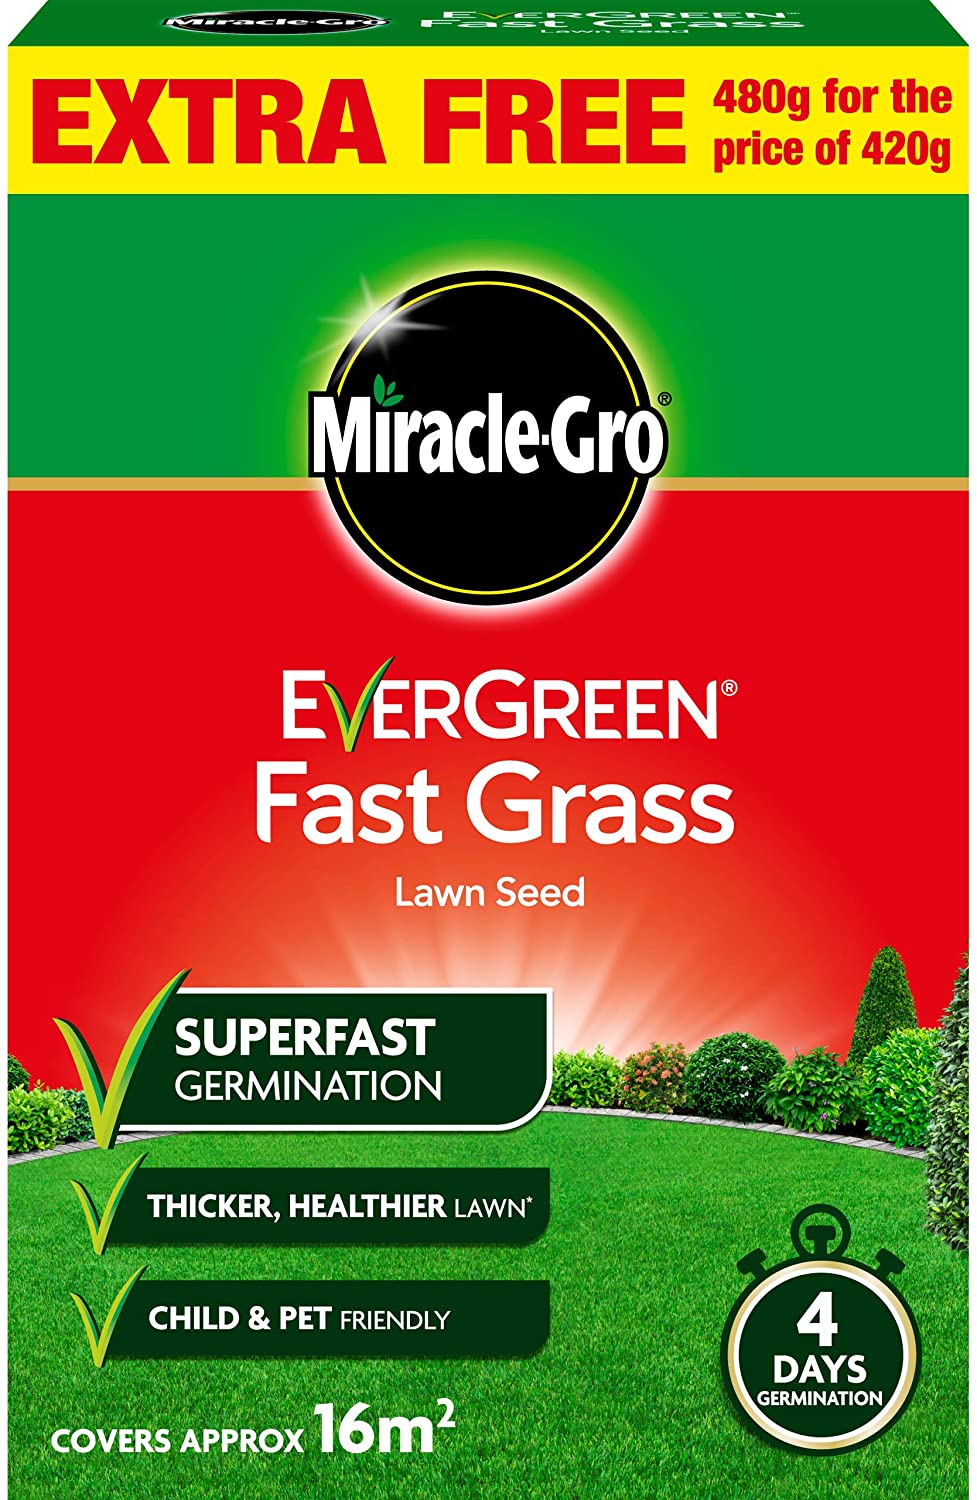 Miracle-Gro-EverGreen-Fast-Grass-Lawn-Seed-Box-Red-480g